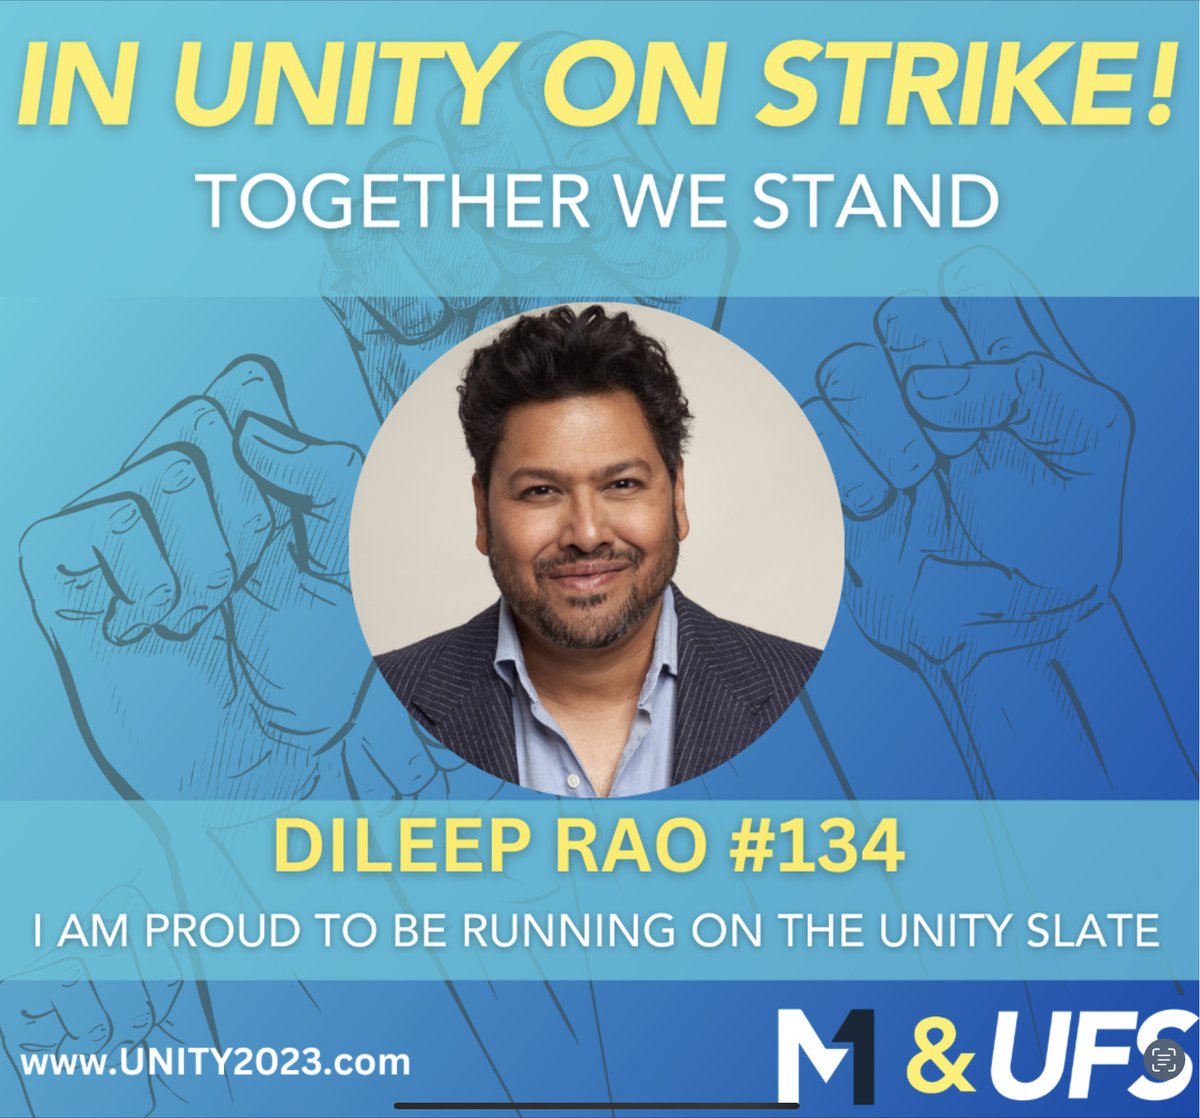 In the midst of an historic strike for restoration of our normal pay, work conditions and our very humanity, we run united! I am #134 on your ballot LA for delegate; I humbly ask for your vote!

#UNITY2023#DrescherFisher2023#membershipfirst#uniteforstrength#SAGAFTRAstrong